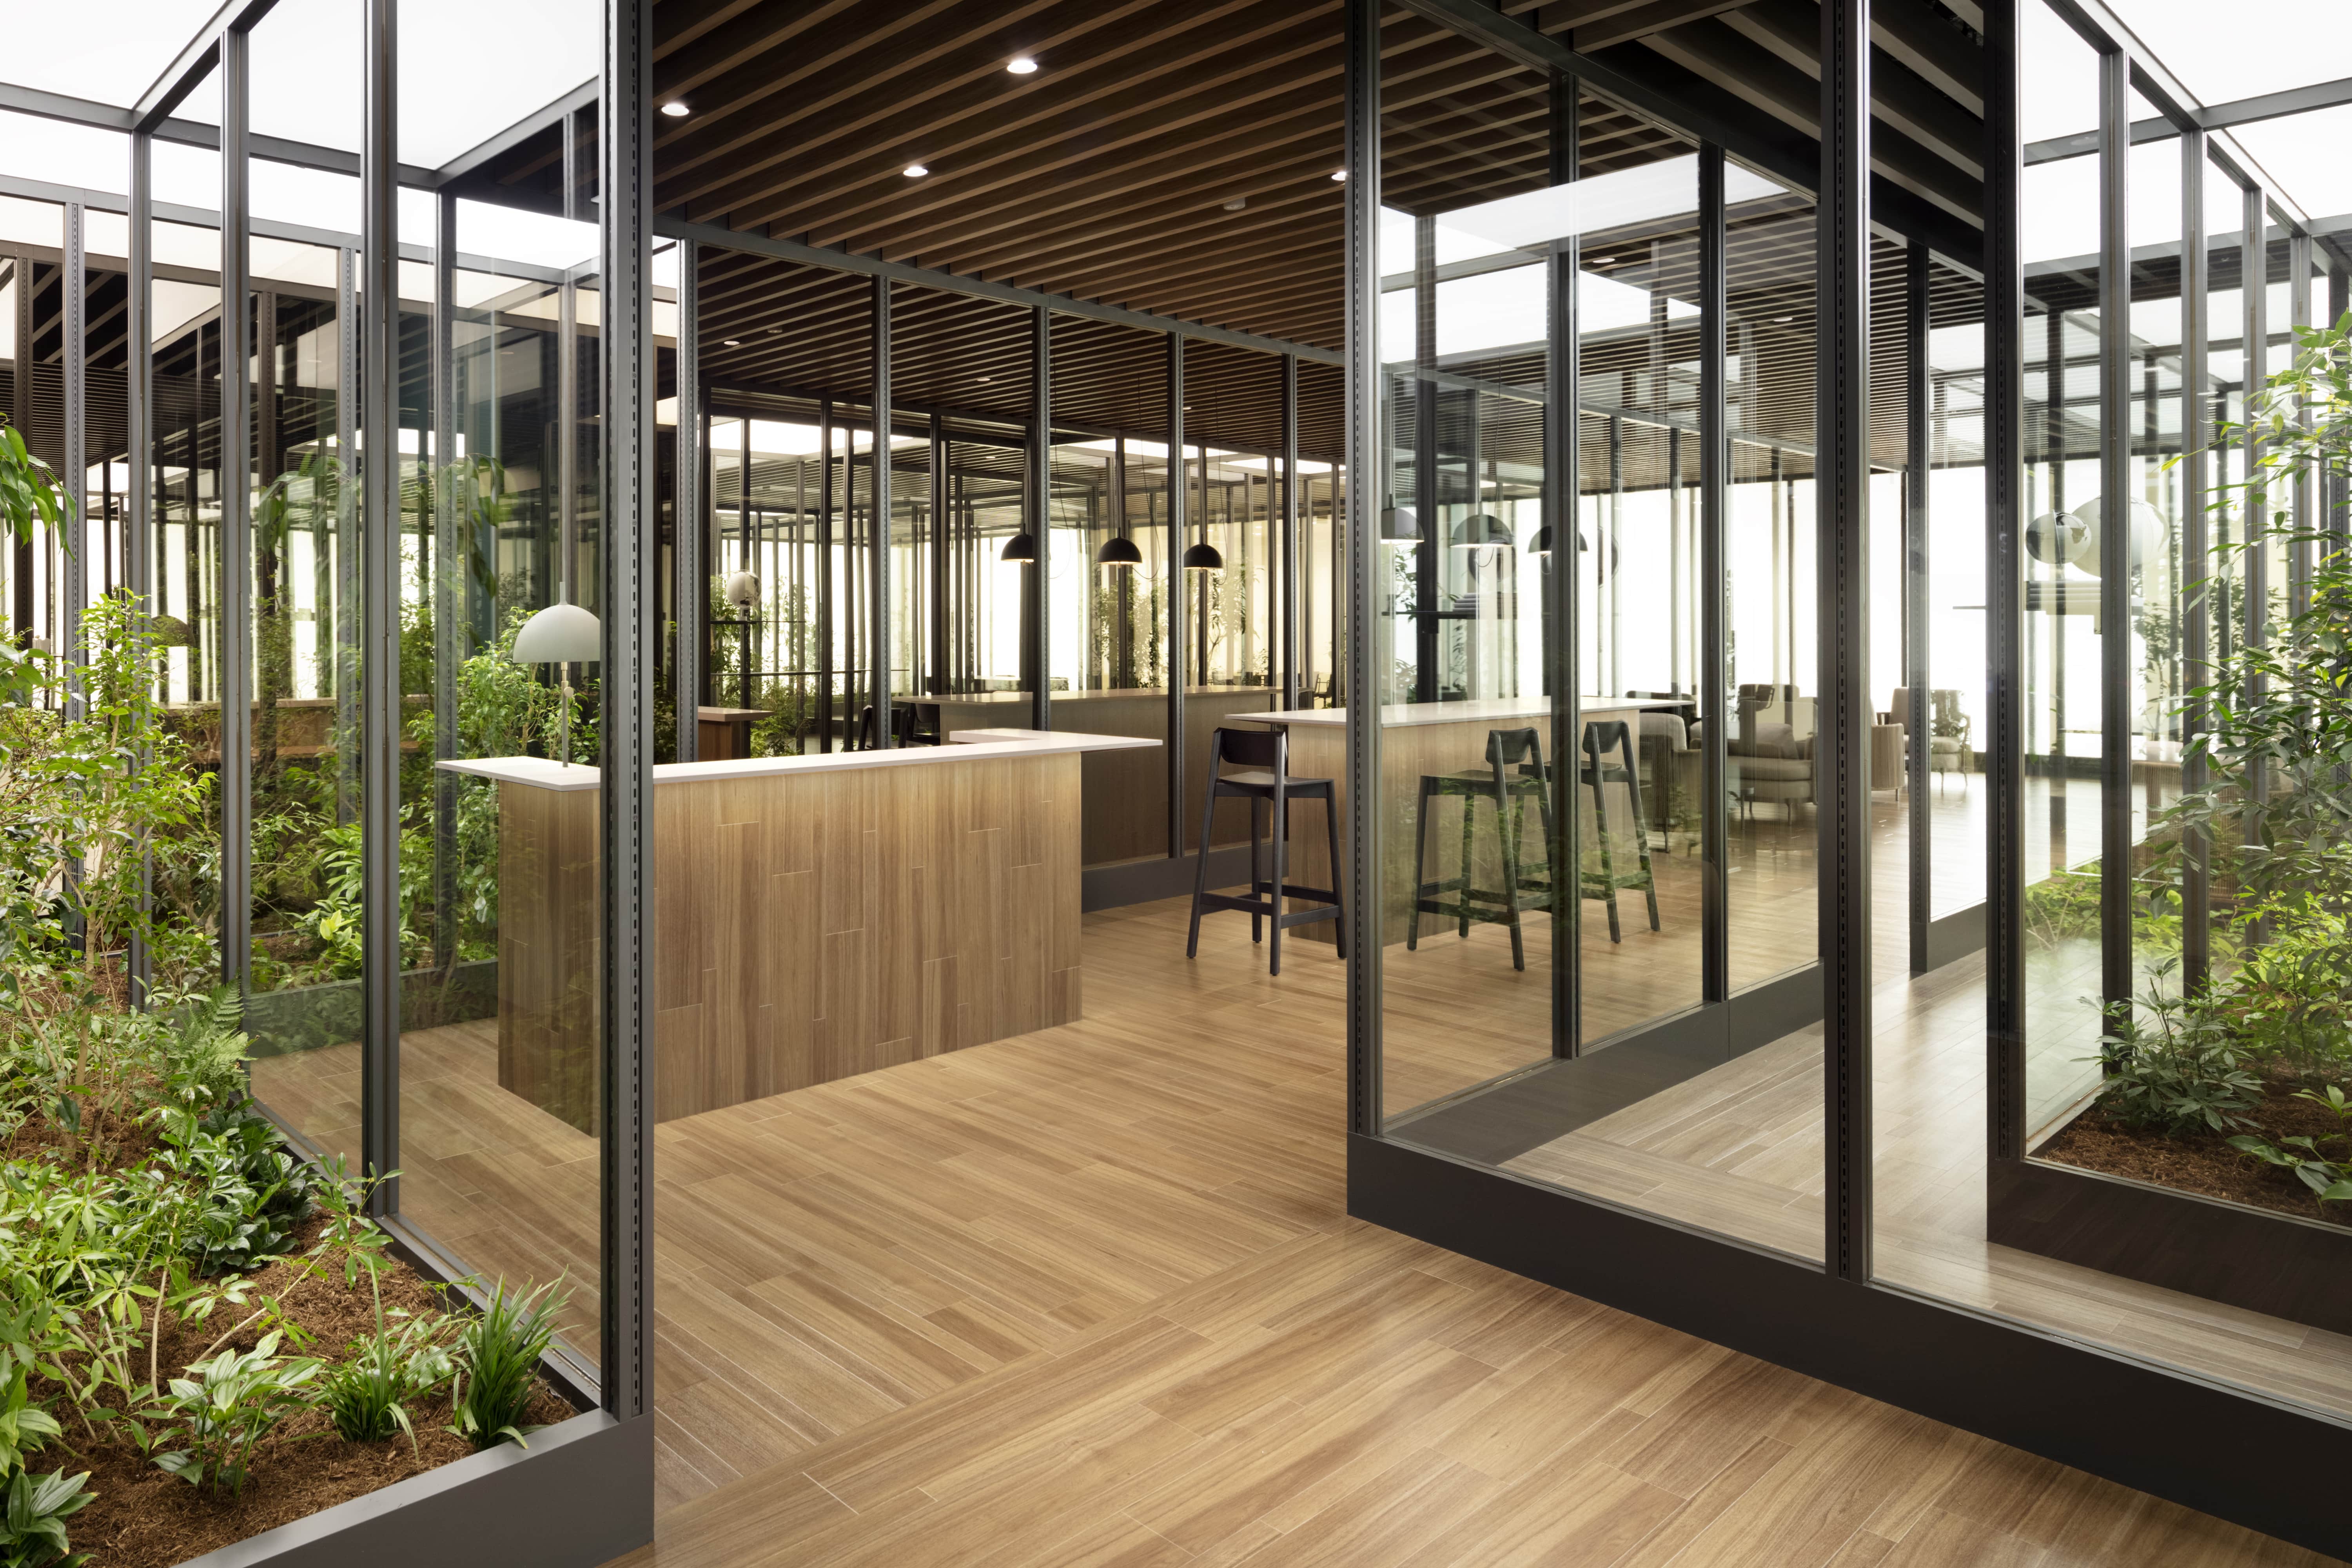 Green nature, sunlight, natural air, and wood are essential elements in building design.